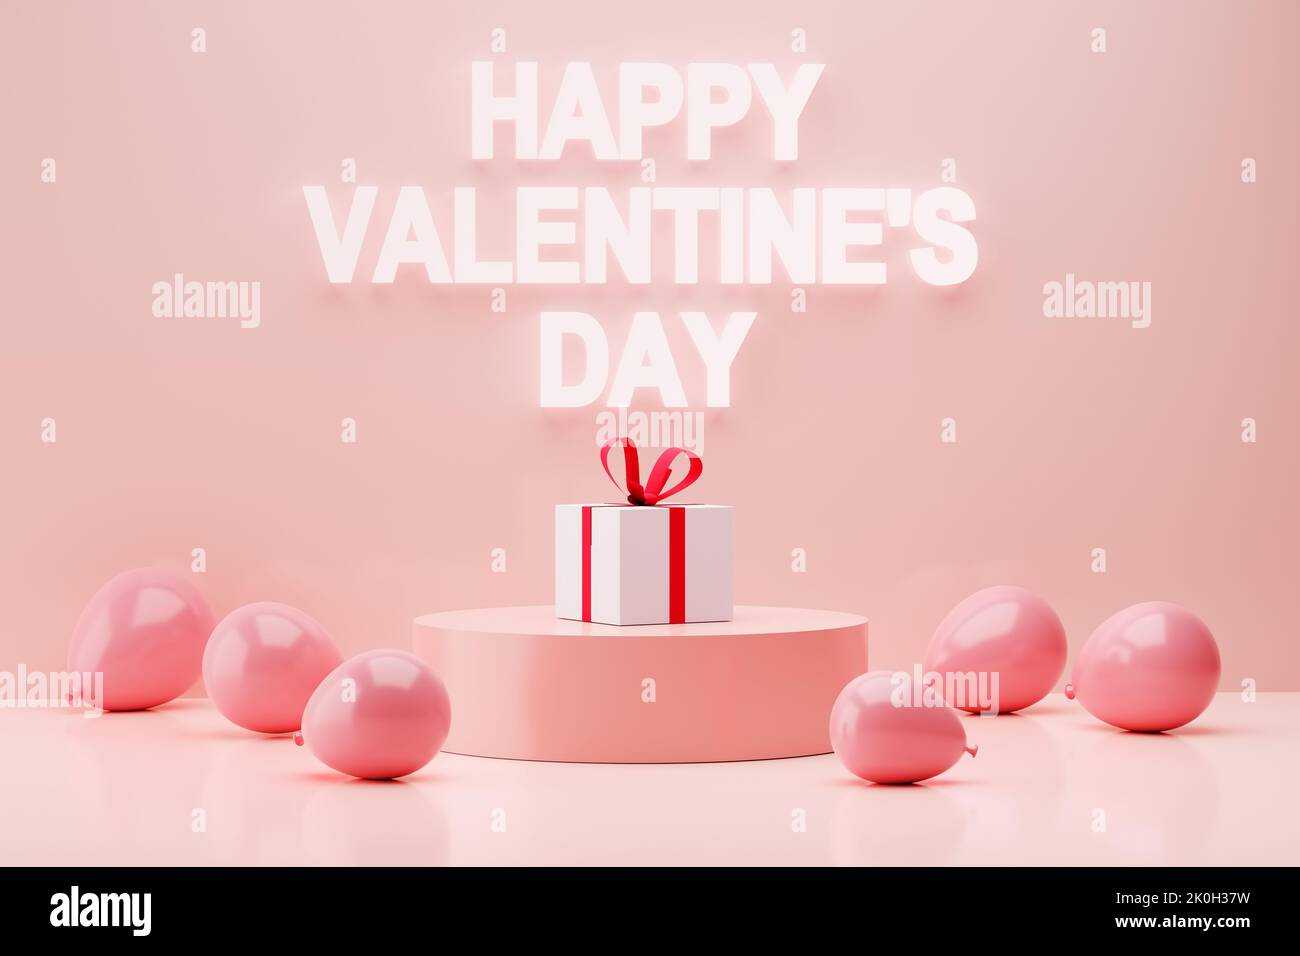 The greeting message happy valentine's day on the wall with gift box on a podium and balloons. Valentine day celebration. 3D rendering. Stock Photo